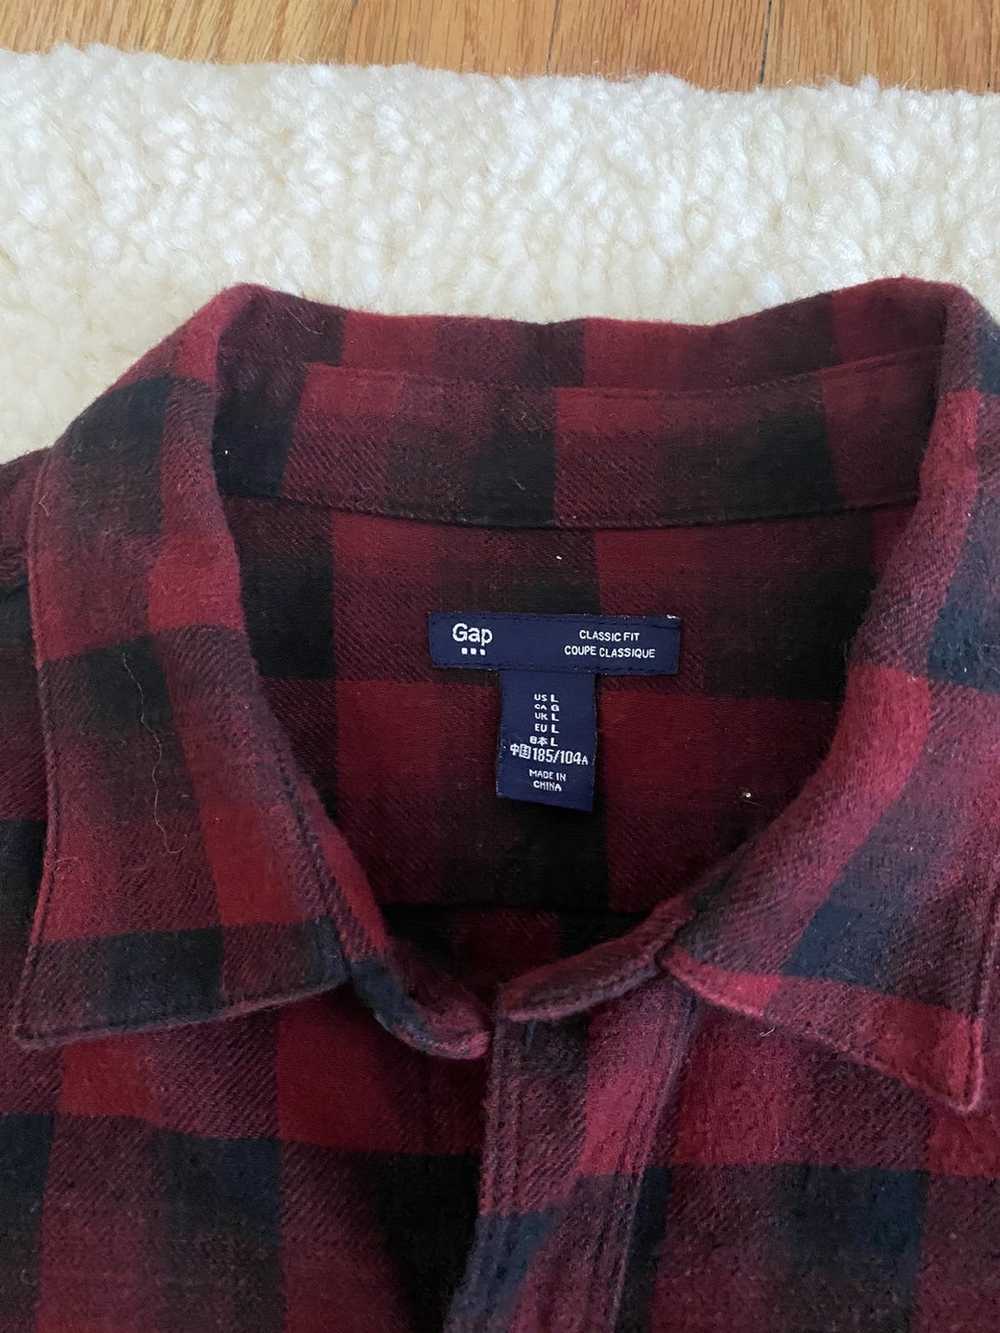 Gap Gap Black and Red Flannel sz L - image 2